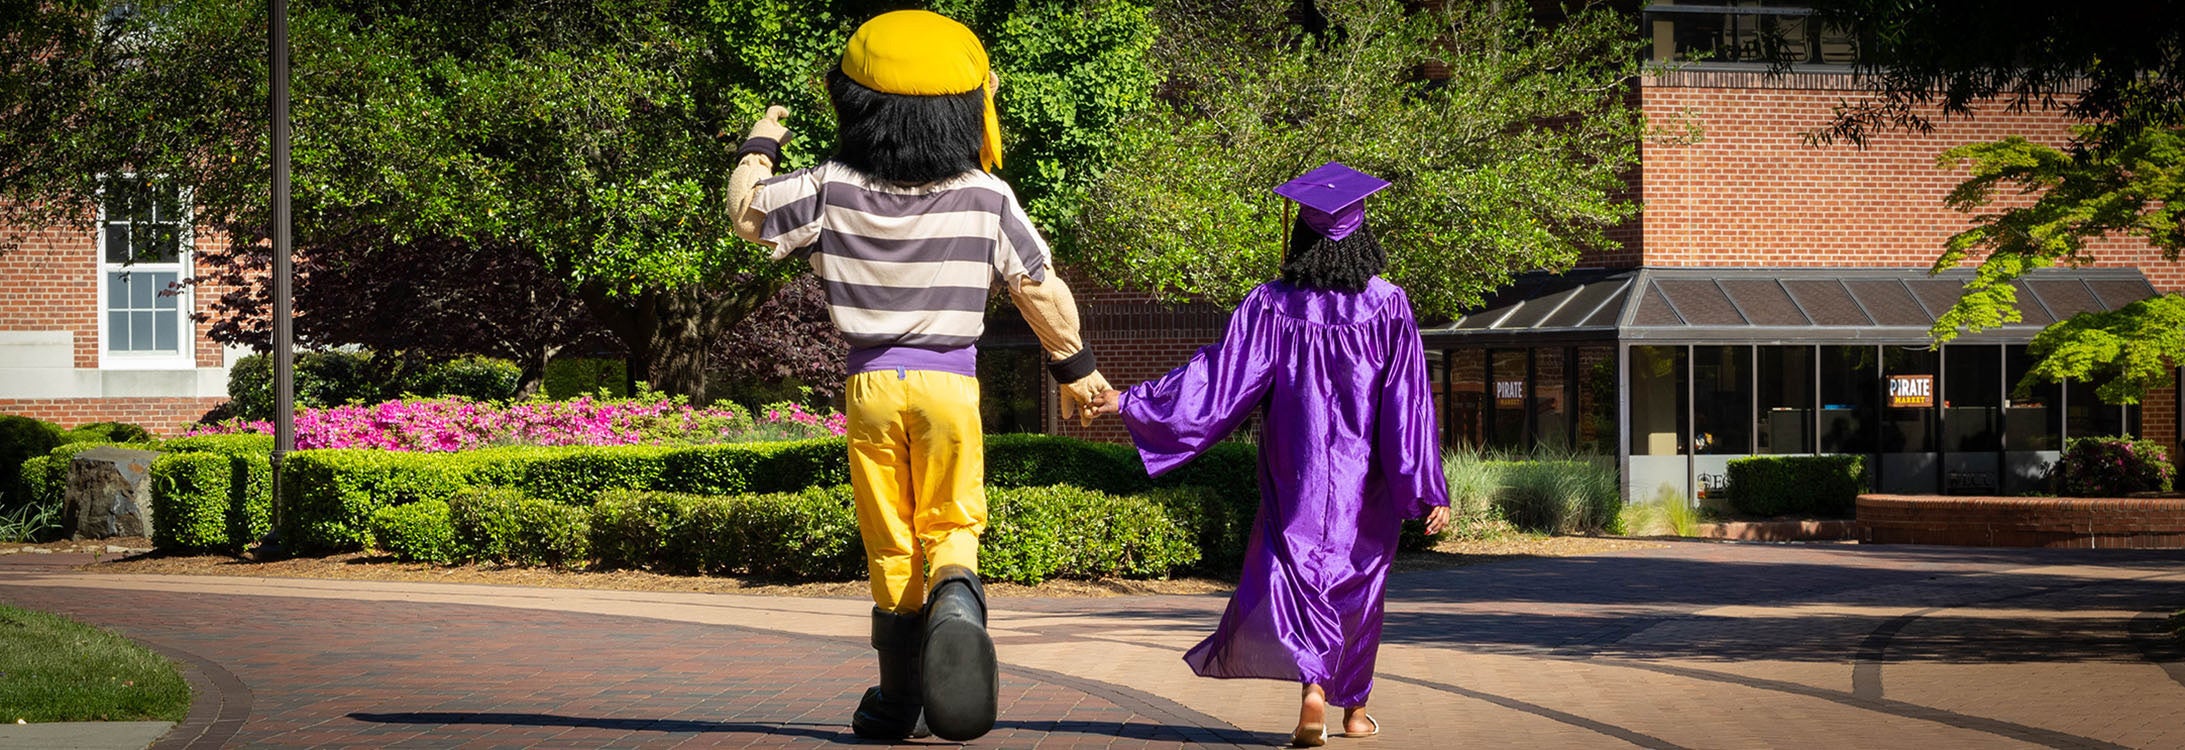 The graduate’s time at ECU will follow them throughout the rest of their lives. (Photo by Rhett Butler)